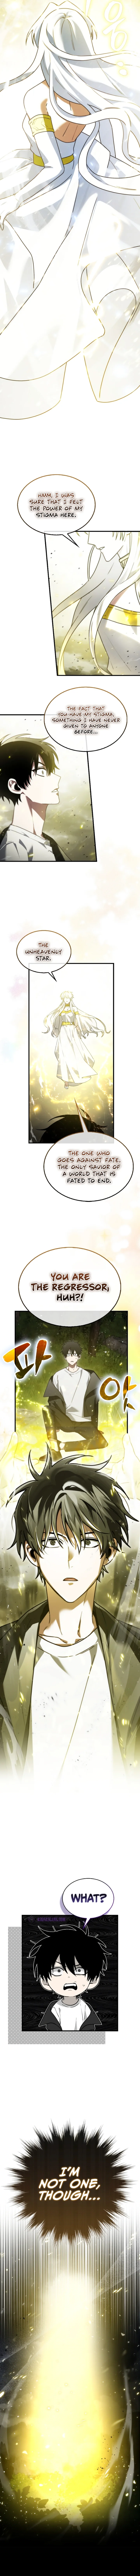 I’m Not a Regressor - Chapter 1 Page 16